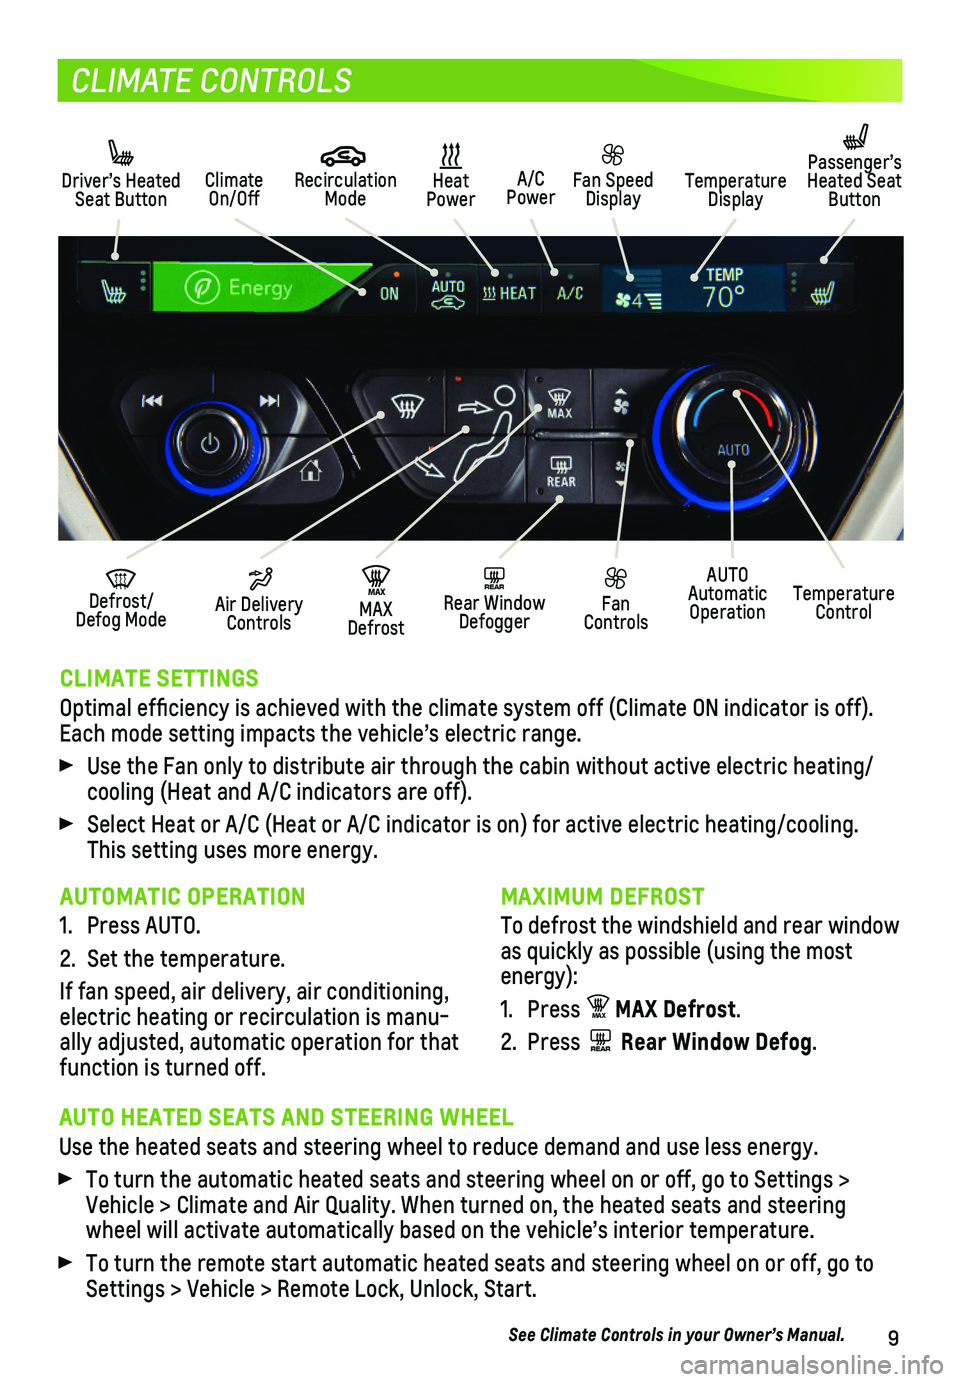 CHEVROLET BOLT EV 2019  Get To Know Guide 9
CLIMATE CONTROLS
CLIMATE SETTINGS 
Optimal efficiency is achieved with the climate system off (Climate O\
N indicator is off). Each mode setting impacts the vehicle’s electric range. 
 Use the Fan